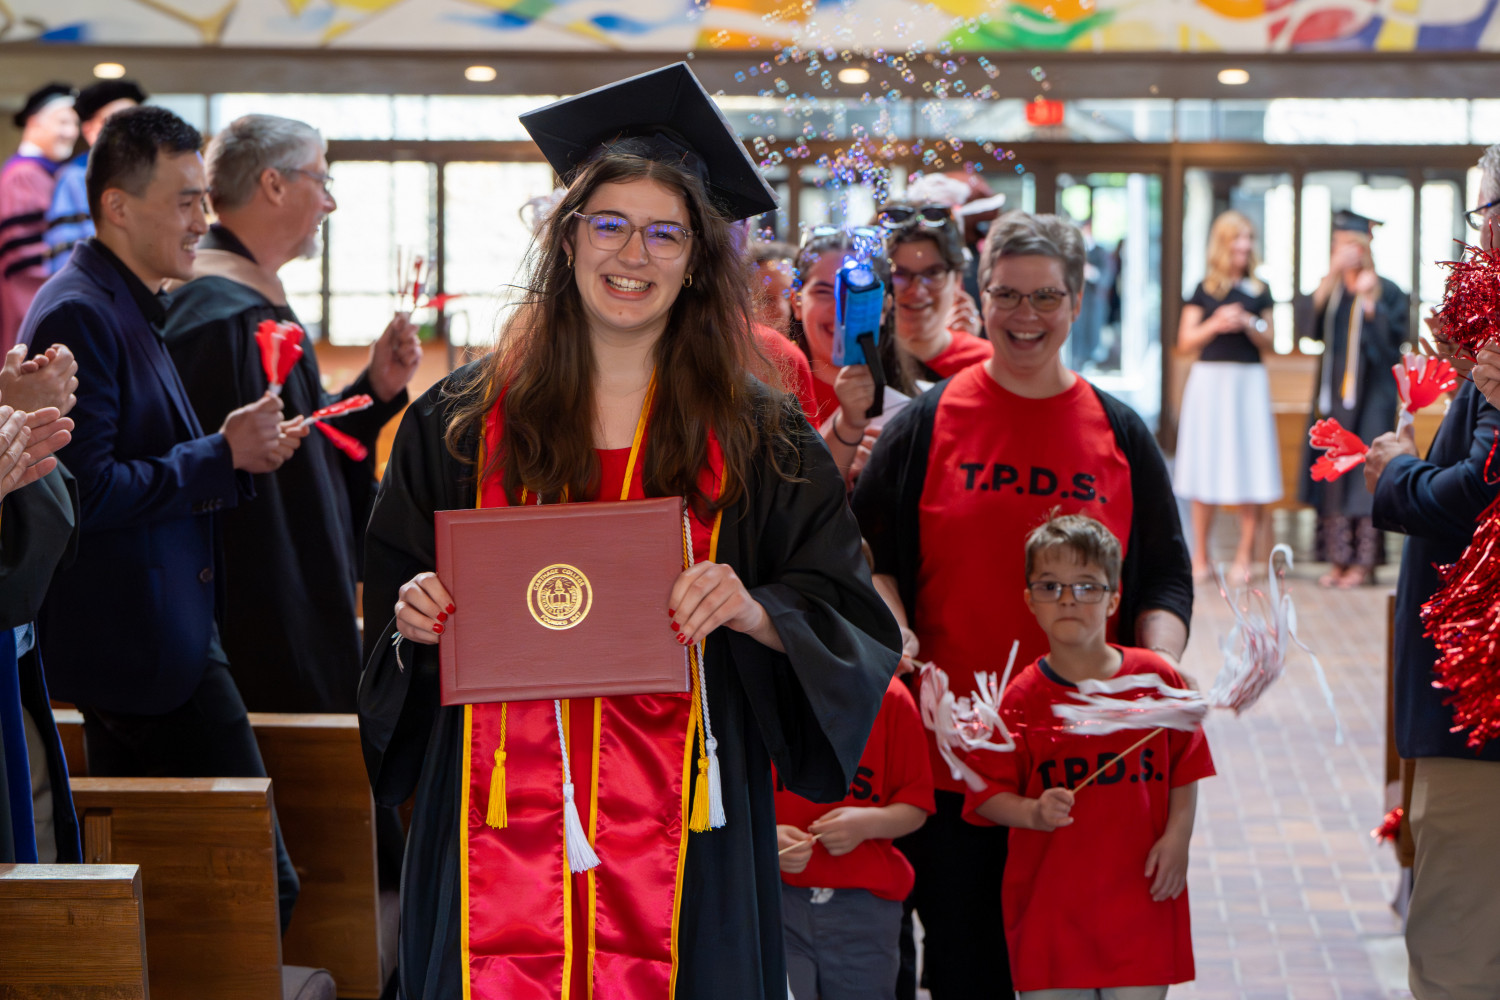 Students were cheered on by faculty in their department after they received their diplomas.